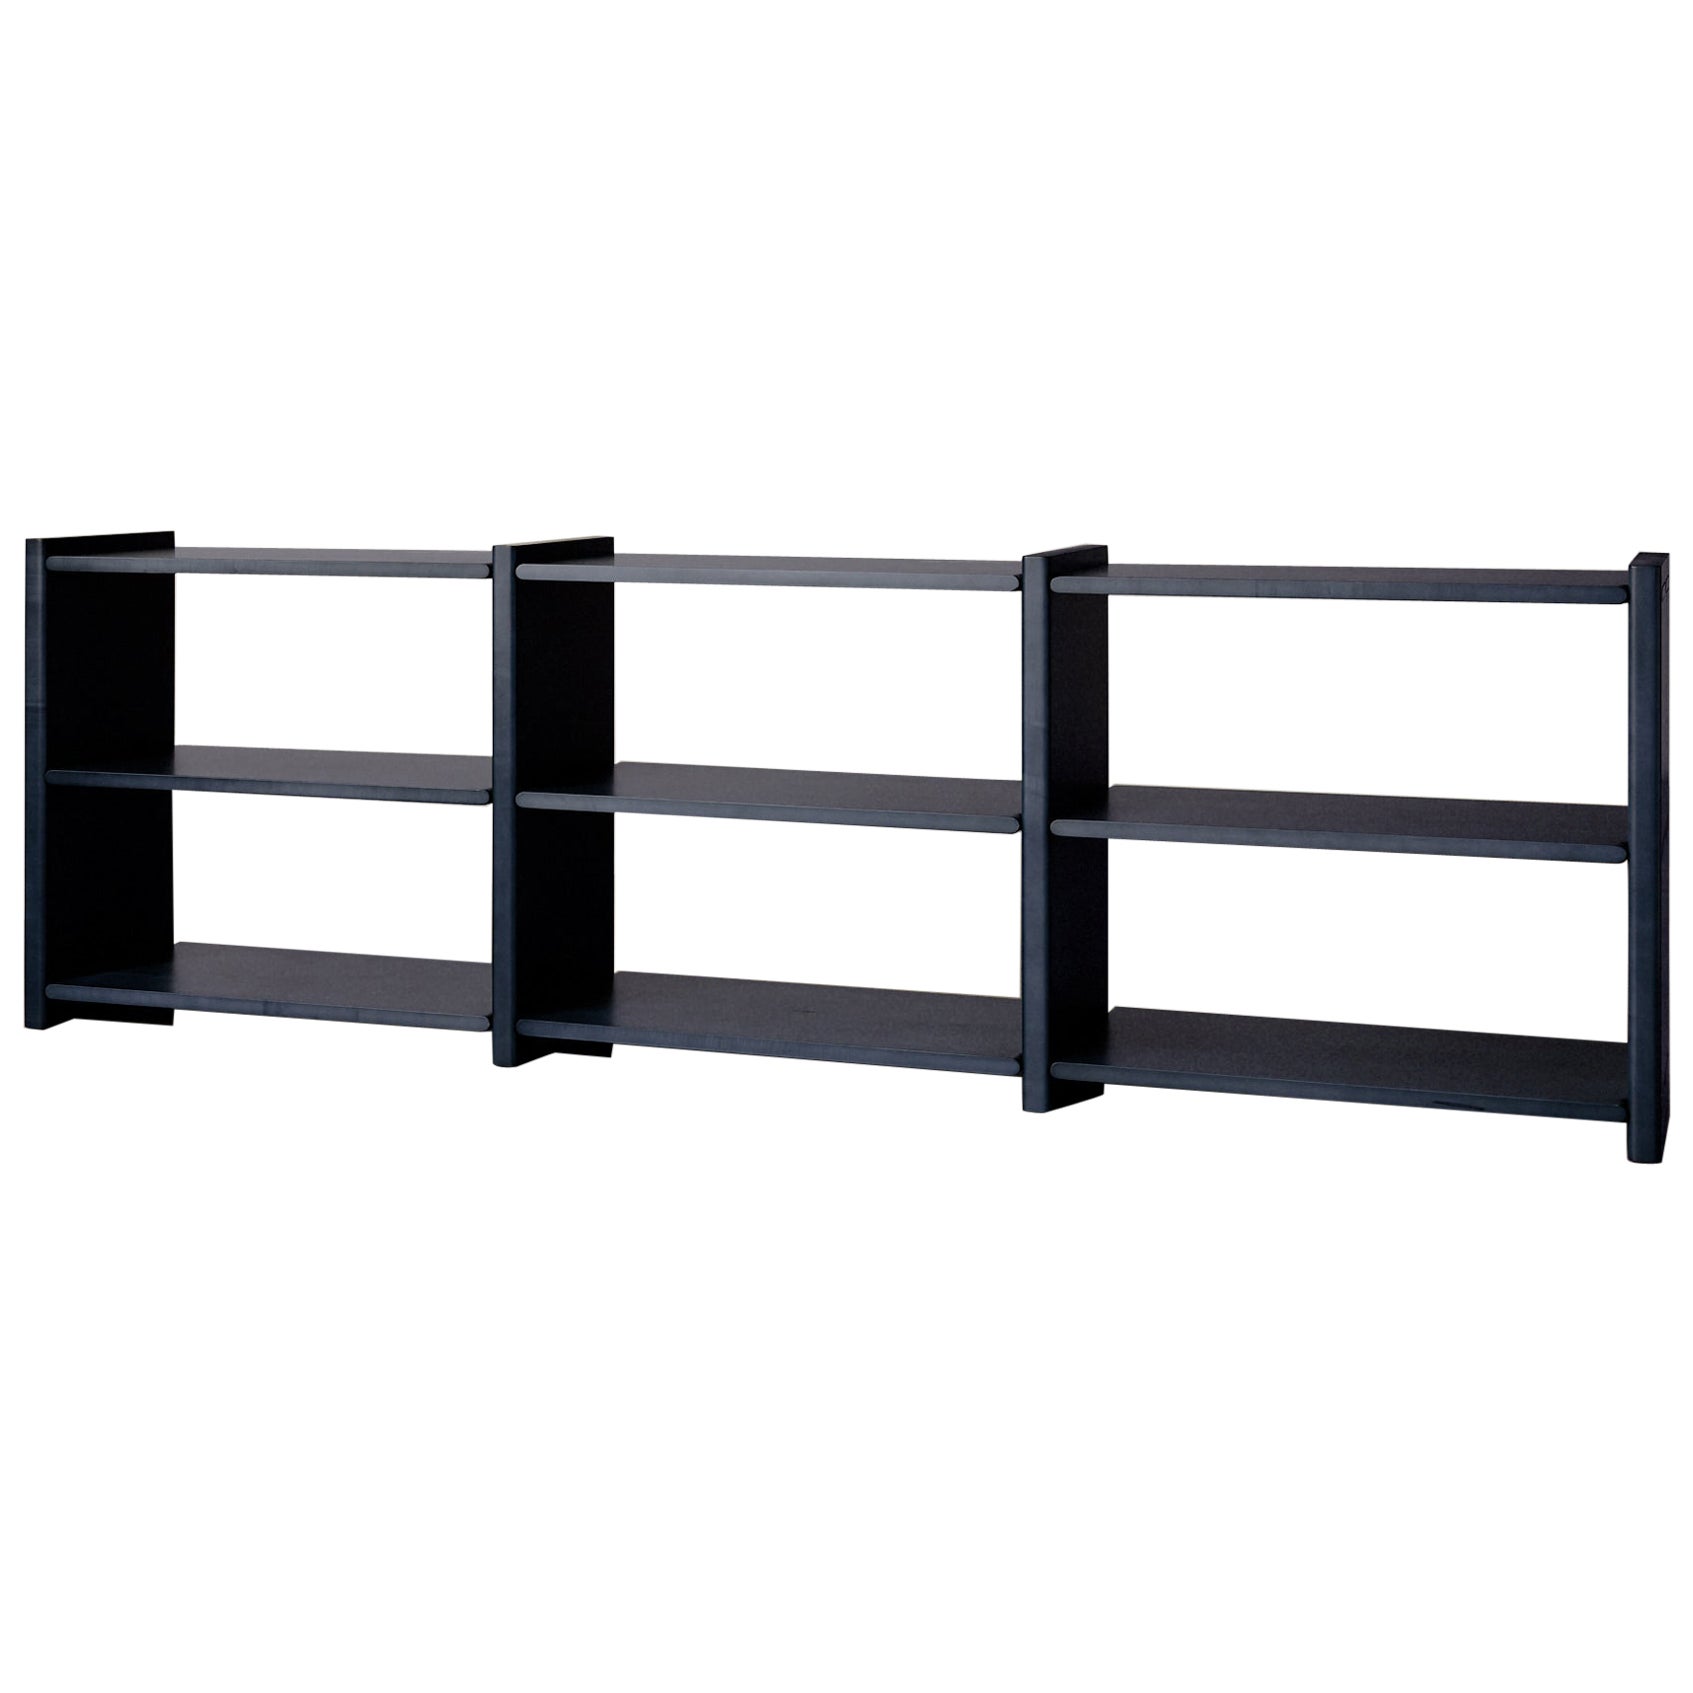 Contemporary 3 Bay Dark Blue Wooden Mortise Shelving System in Maple by JUNTOS